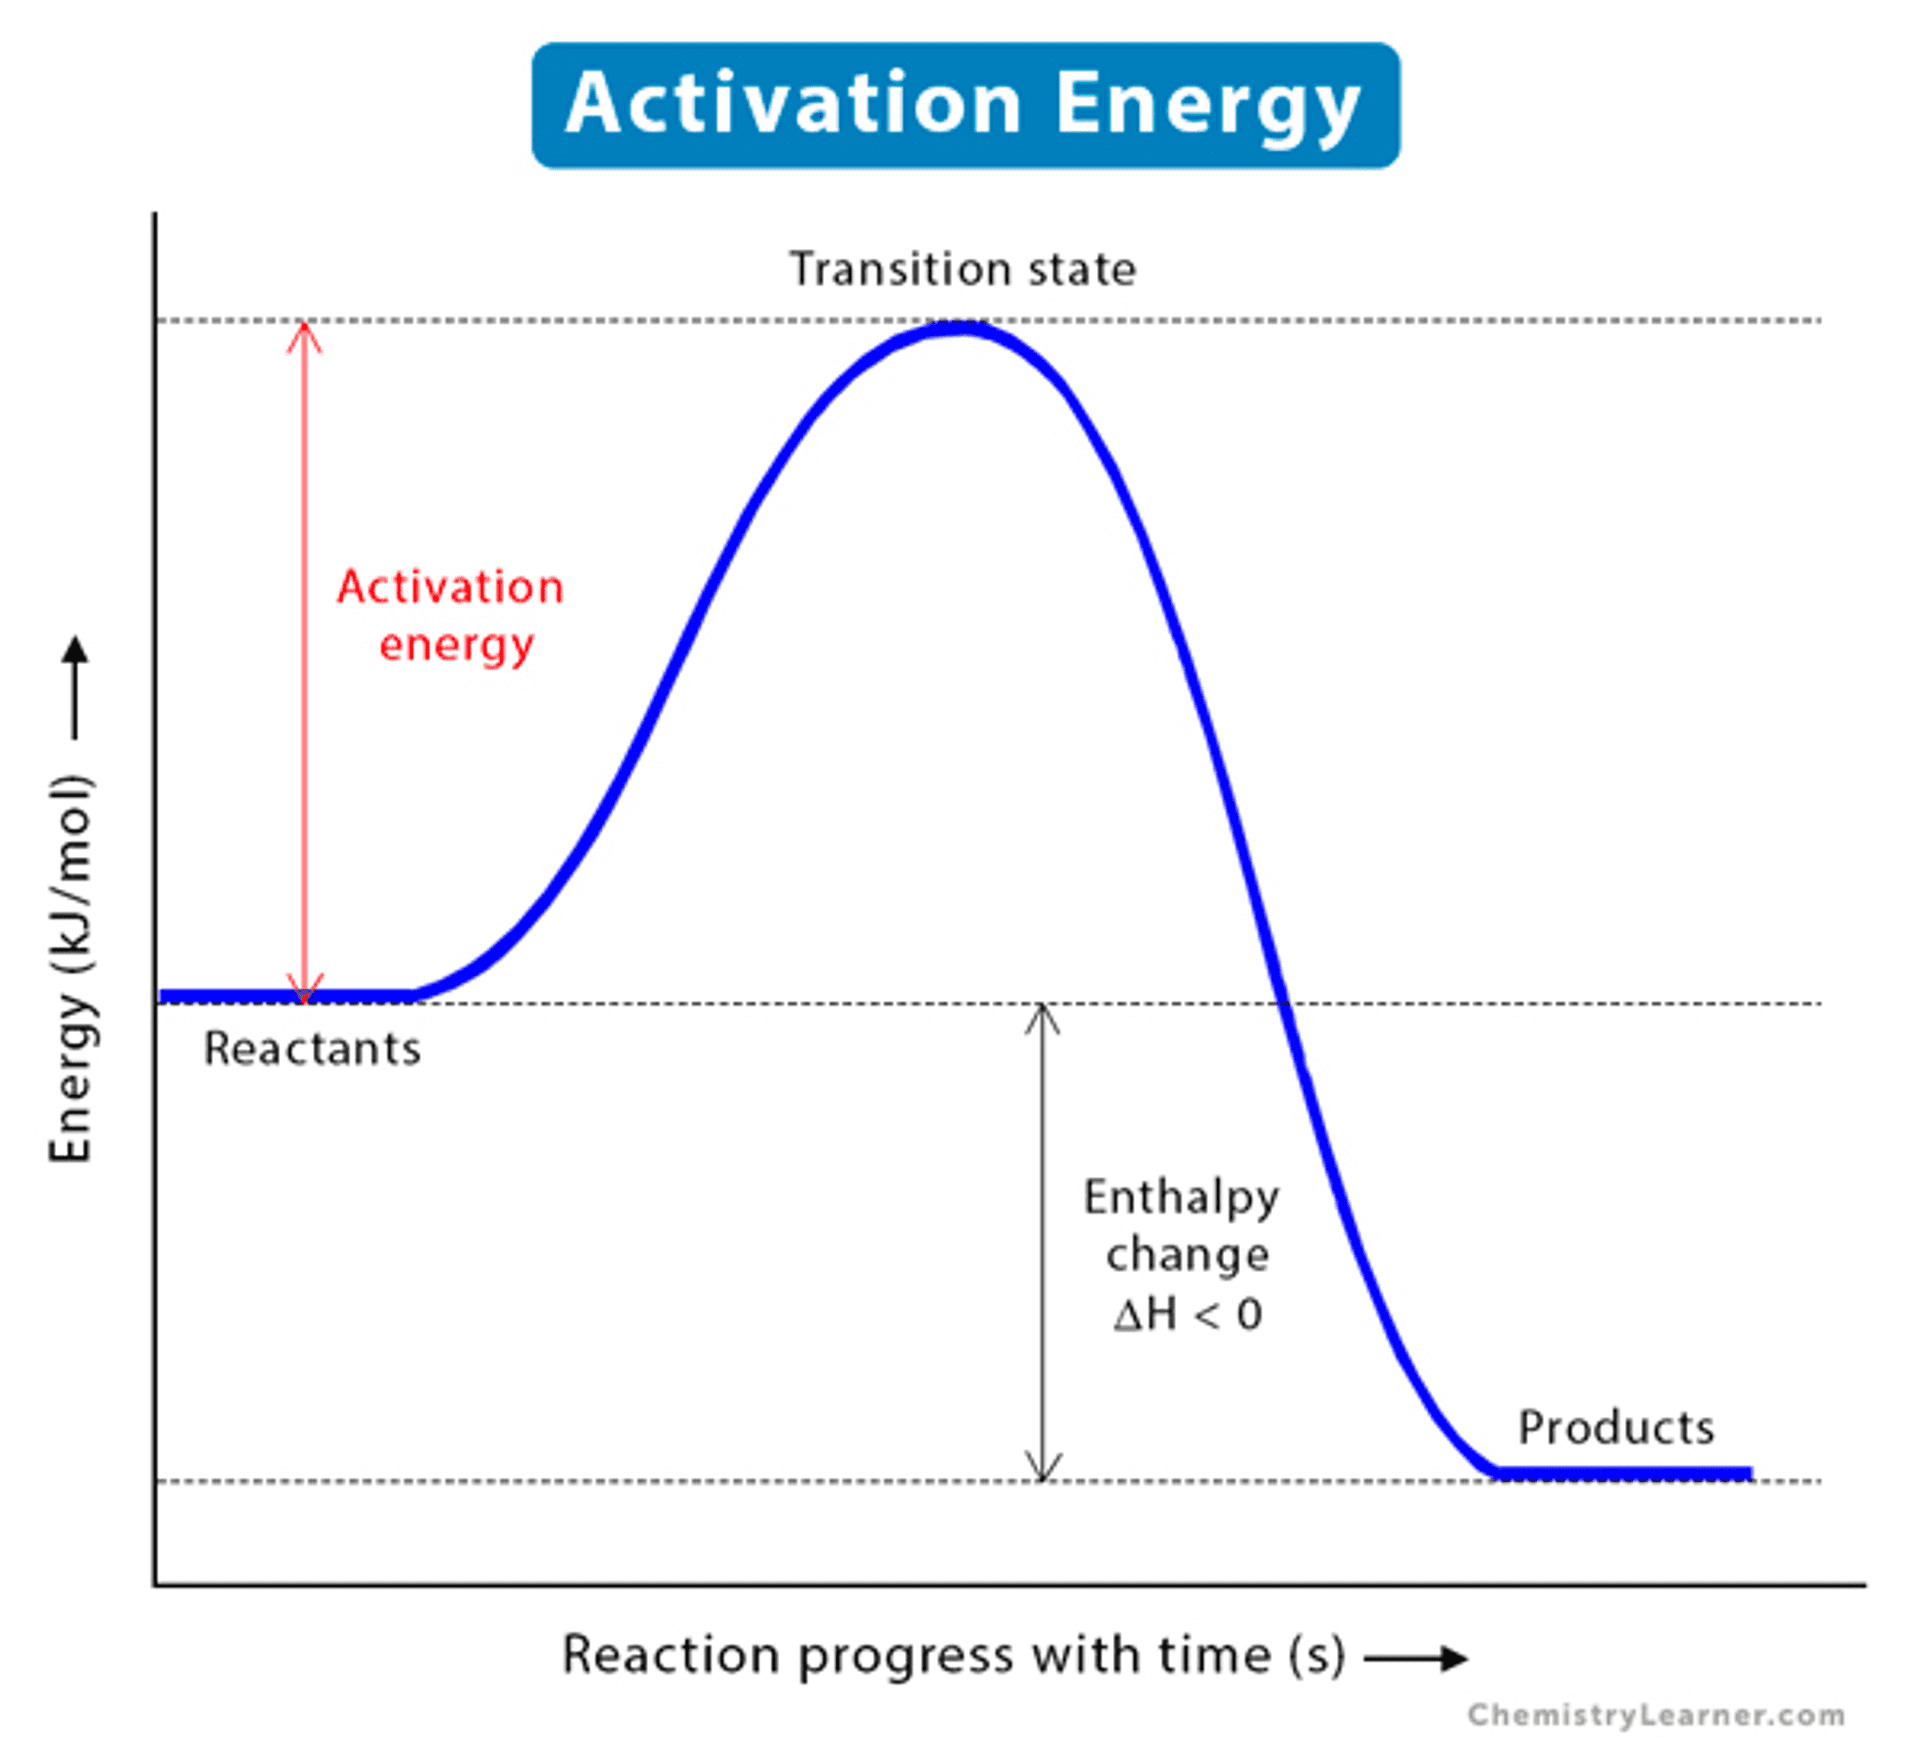 Activate energy chart